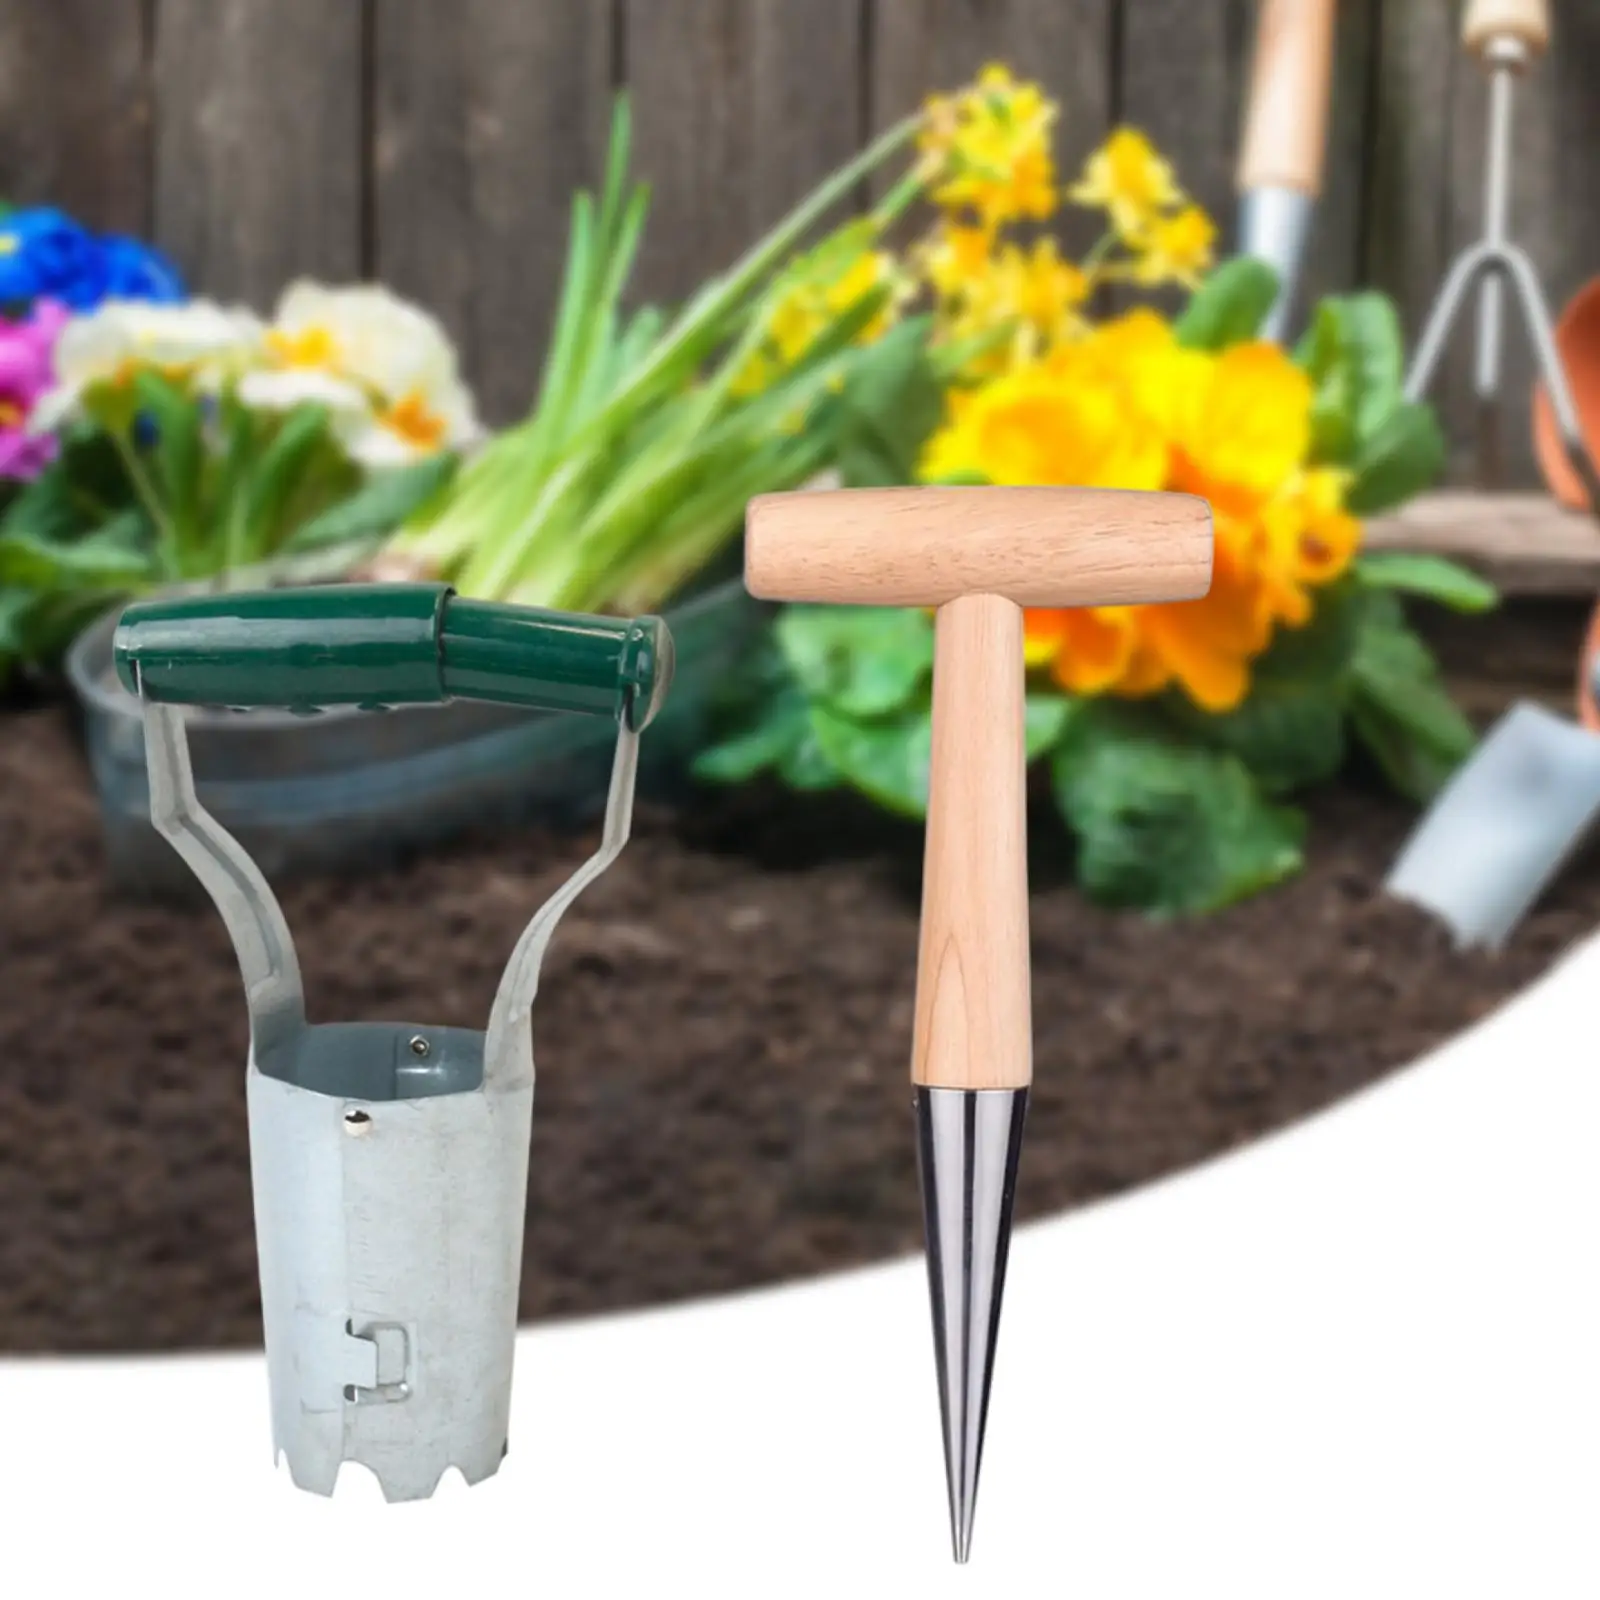 2 Pieces Planting Seed and Bulb Tool, Garden Planter Transplanting, Seed Planter